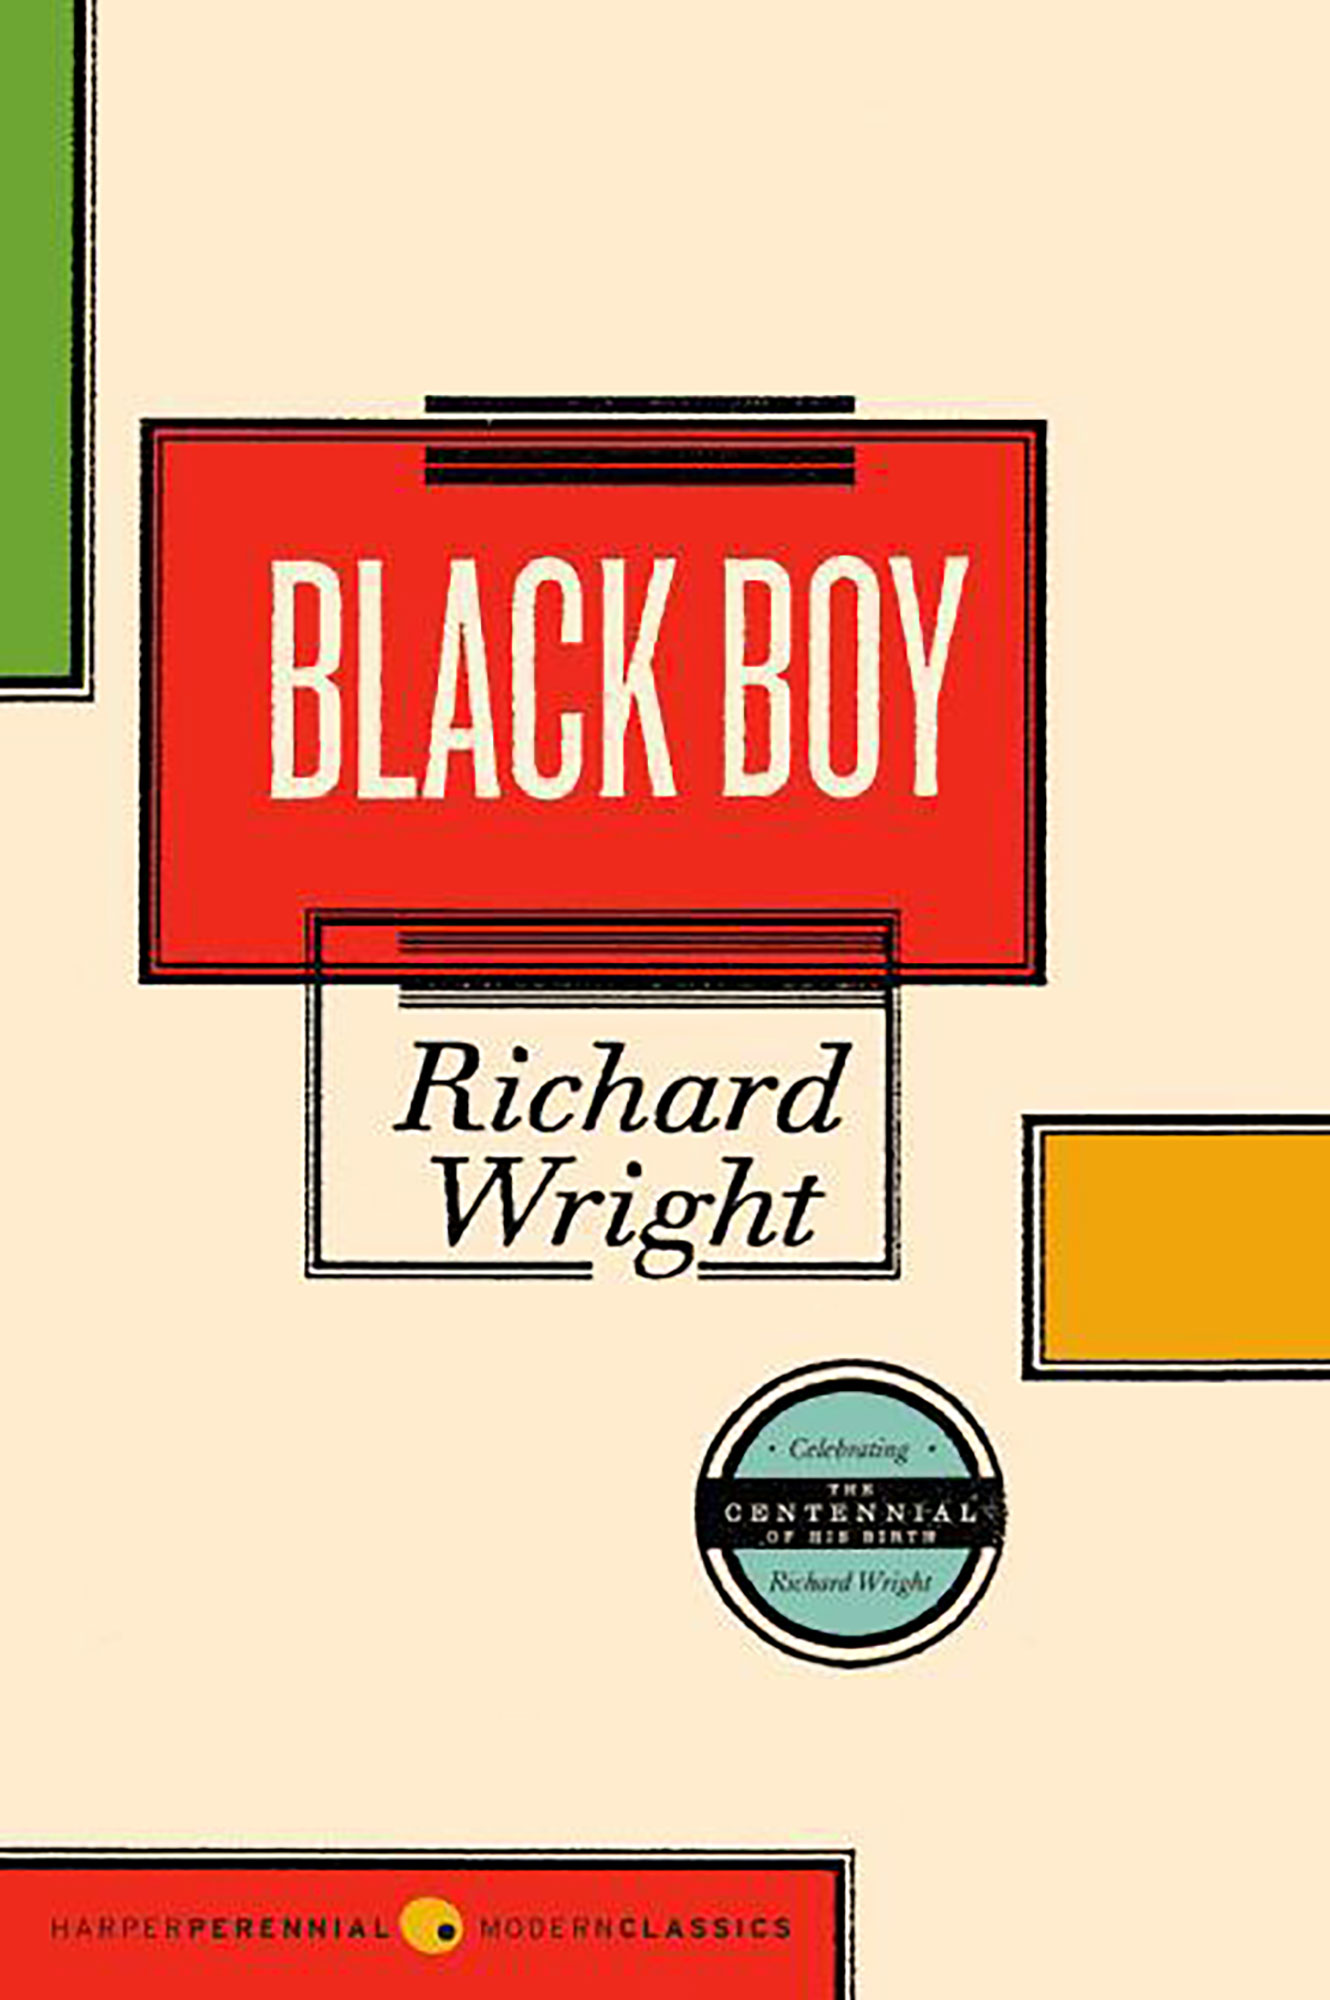 COVER: Tan background with scattered green, yellow and red rectangles. There is a red rectangle in the middle with the text "Black Boy" and a clear rectangle with the author's name in the middle. Book cover courtesy of Harper Collins Publishers. SOURCE: https://www.harpercollins.com/products/black-boy-richard-wright?variant=32207521382434